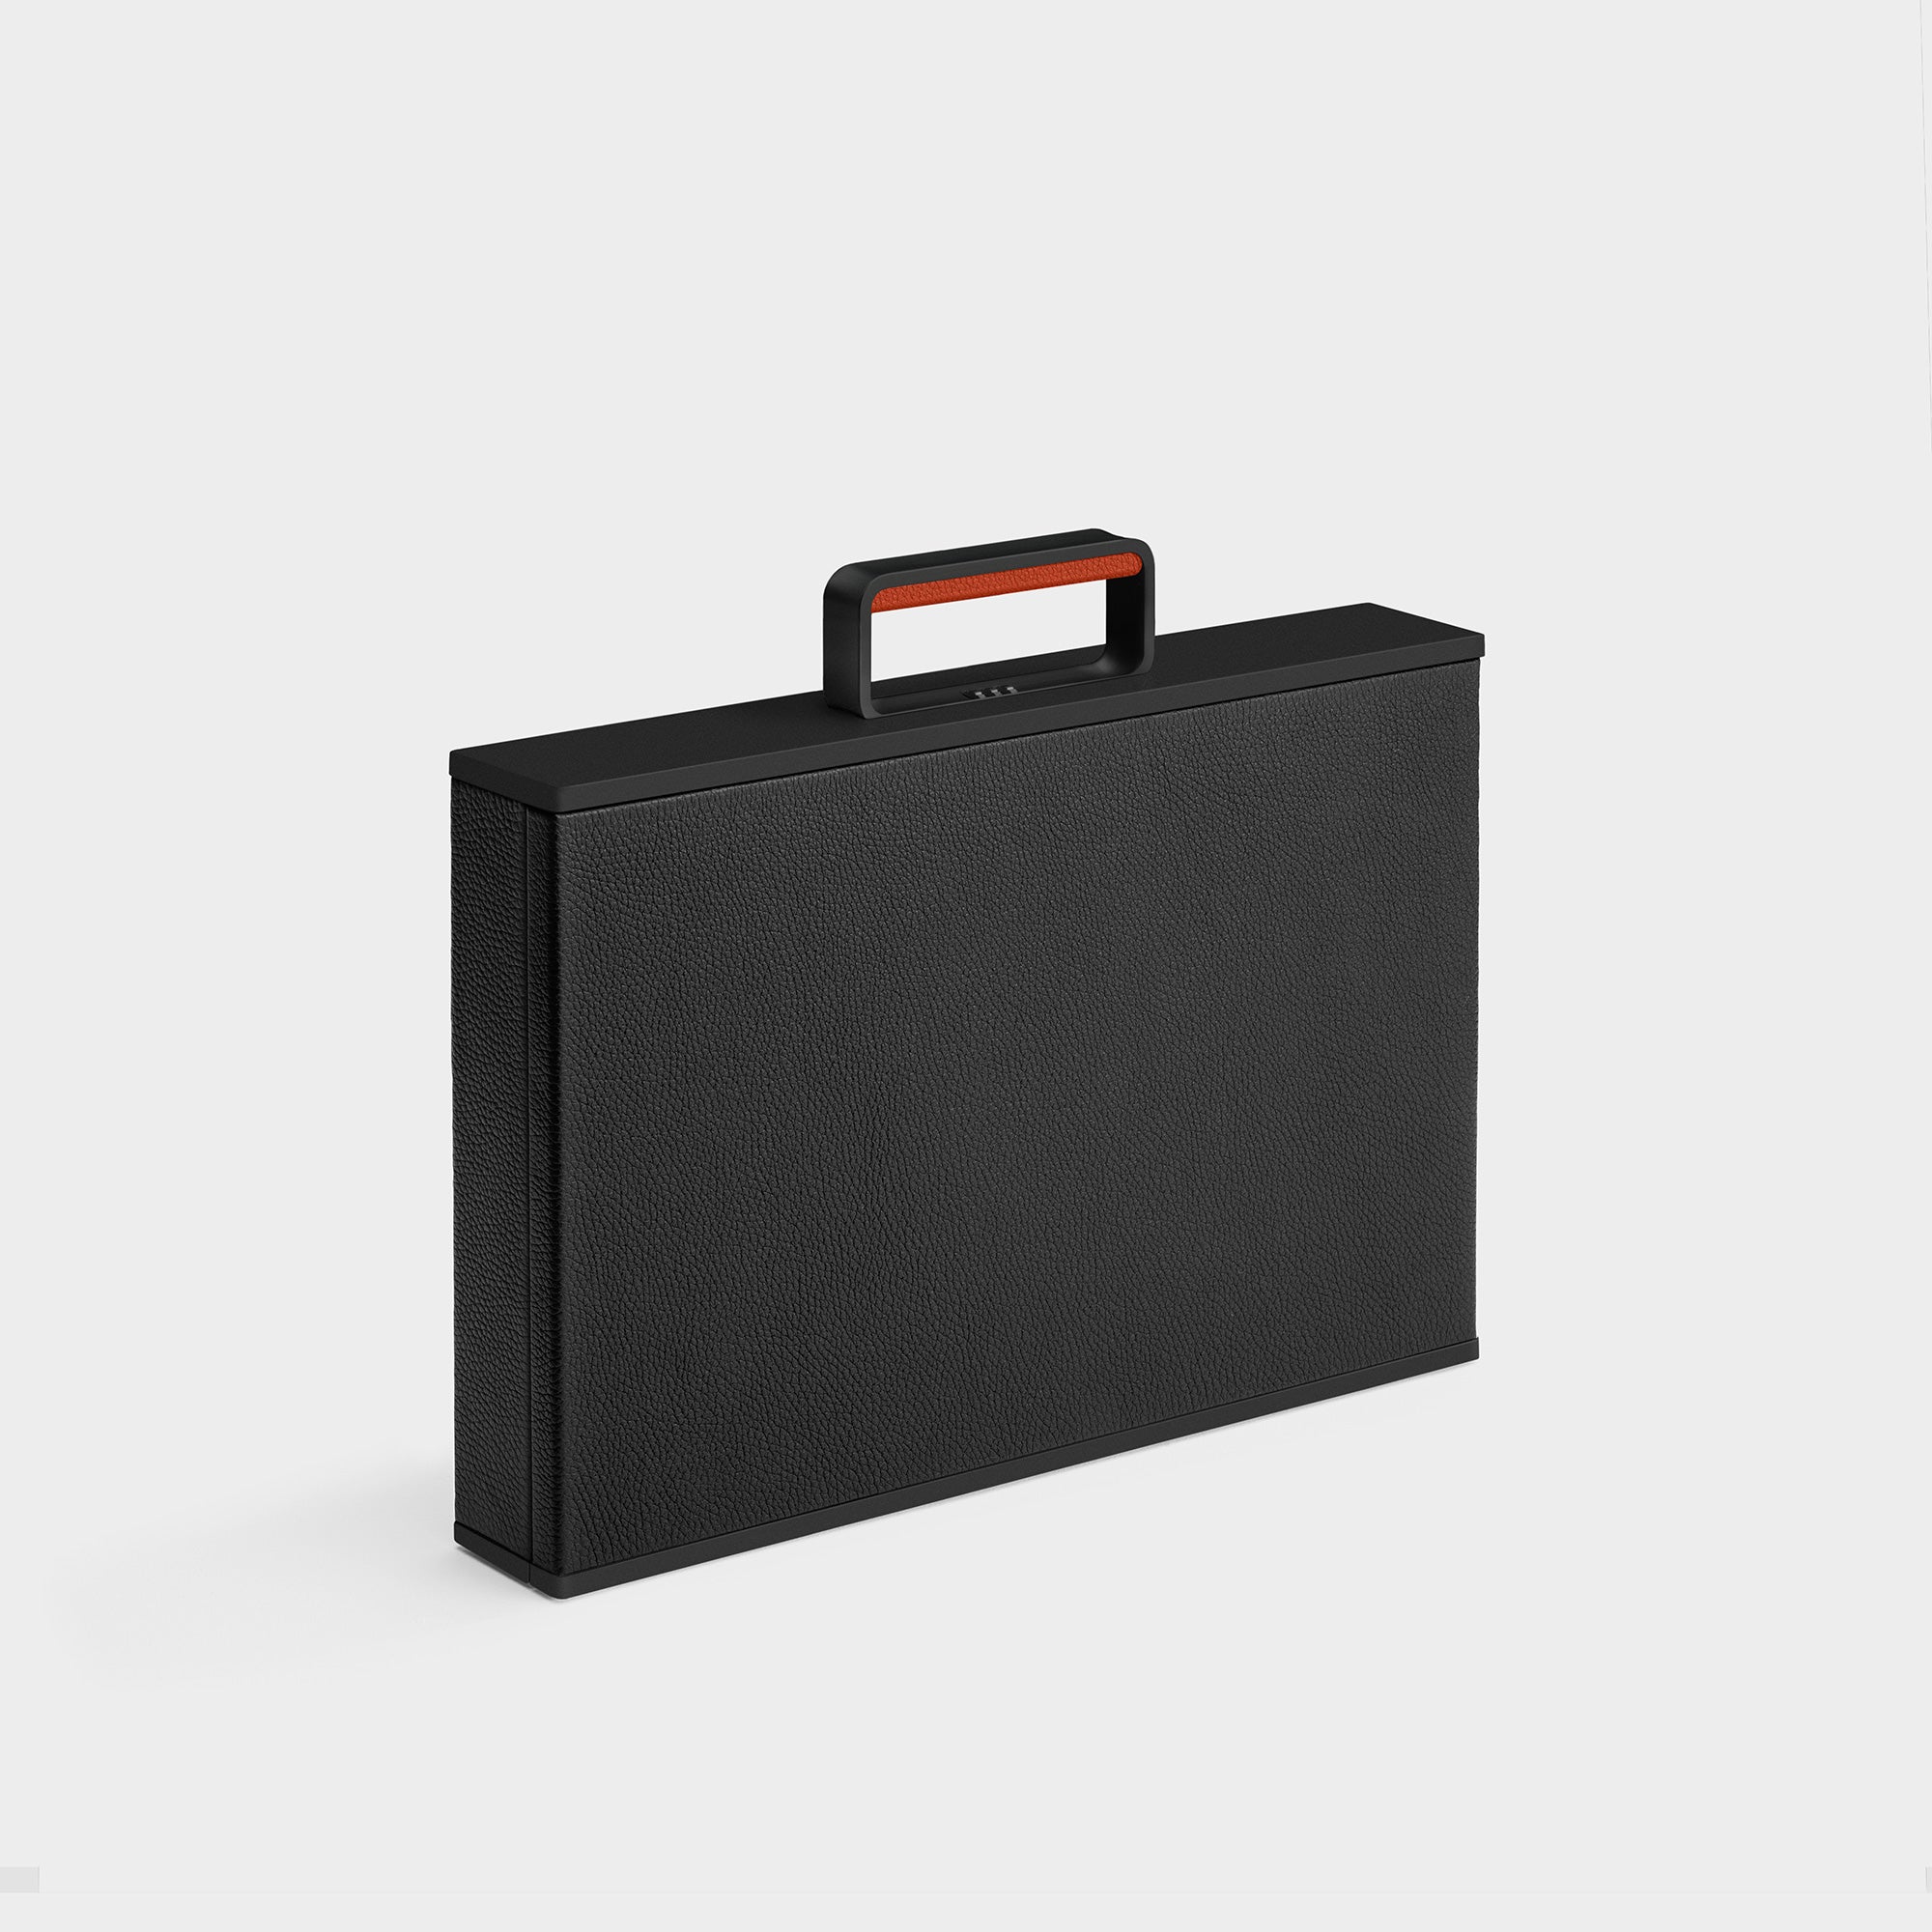 Charles Simon Mackenzie briefcase in all black with red leather accents made from aluminum and carbon fiber casing, fine French leather and Alcantara lining